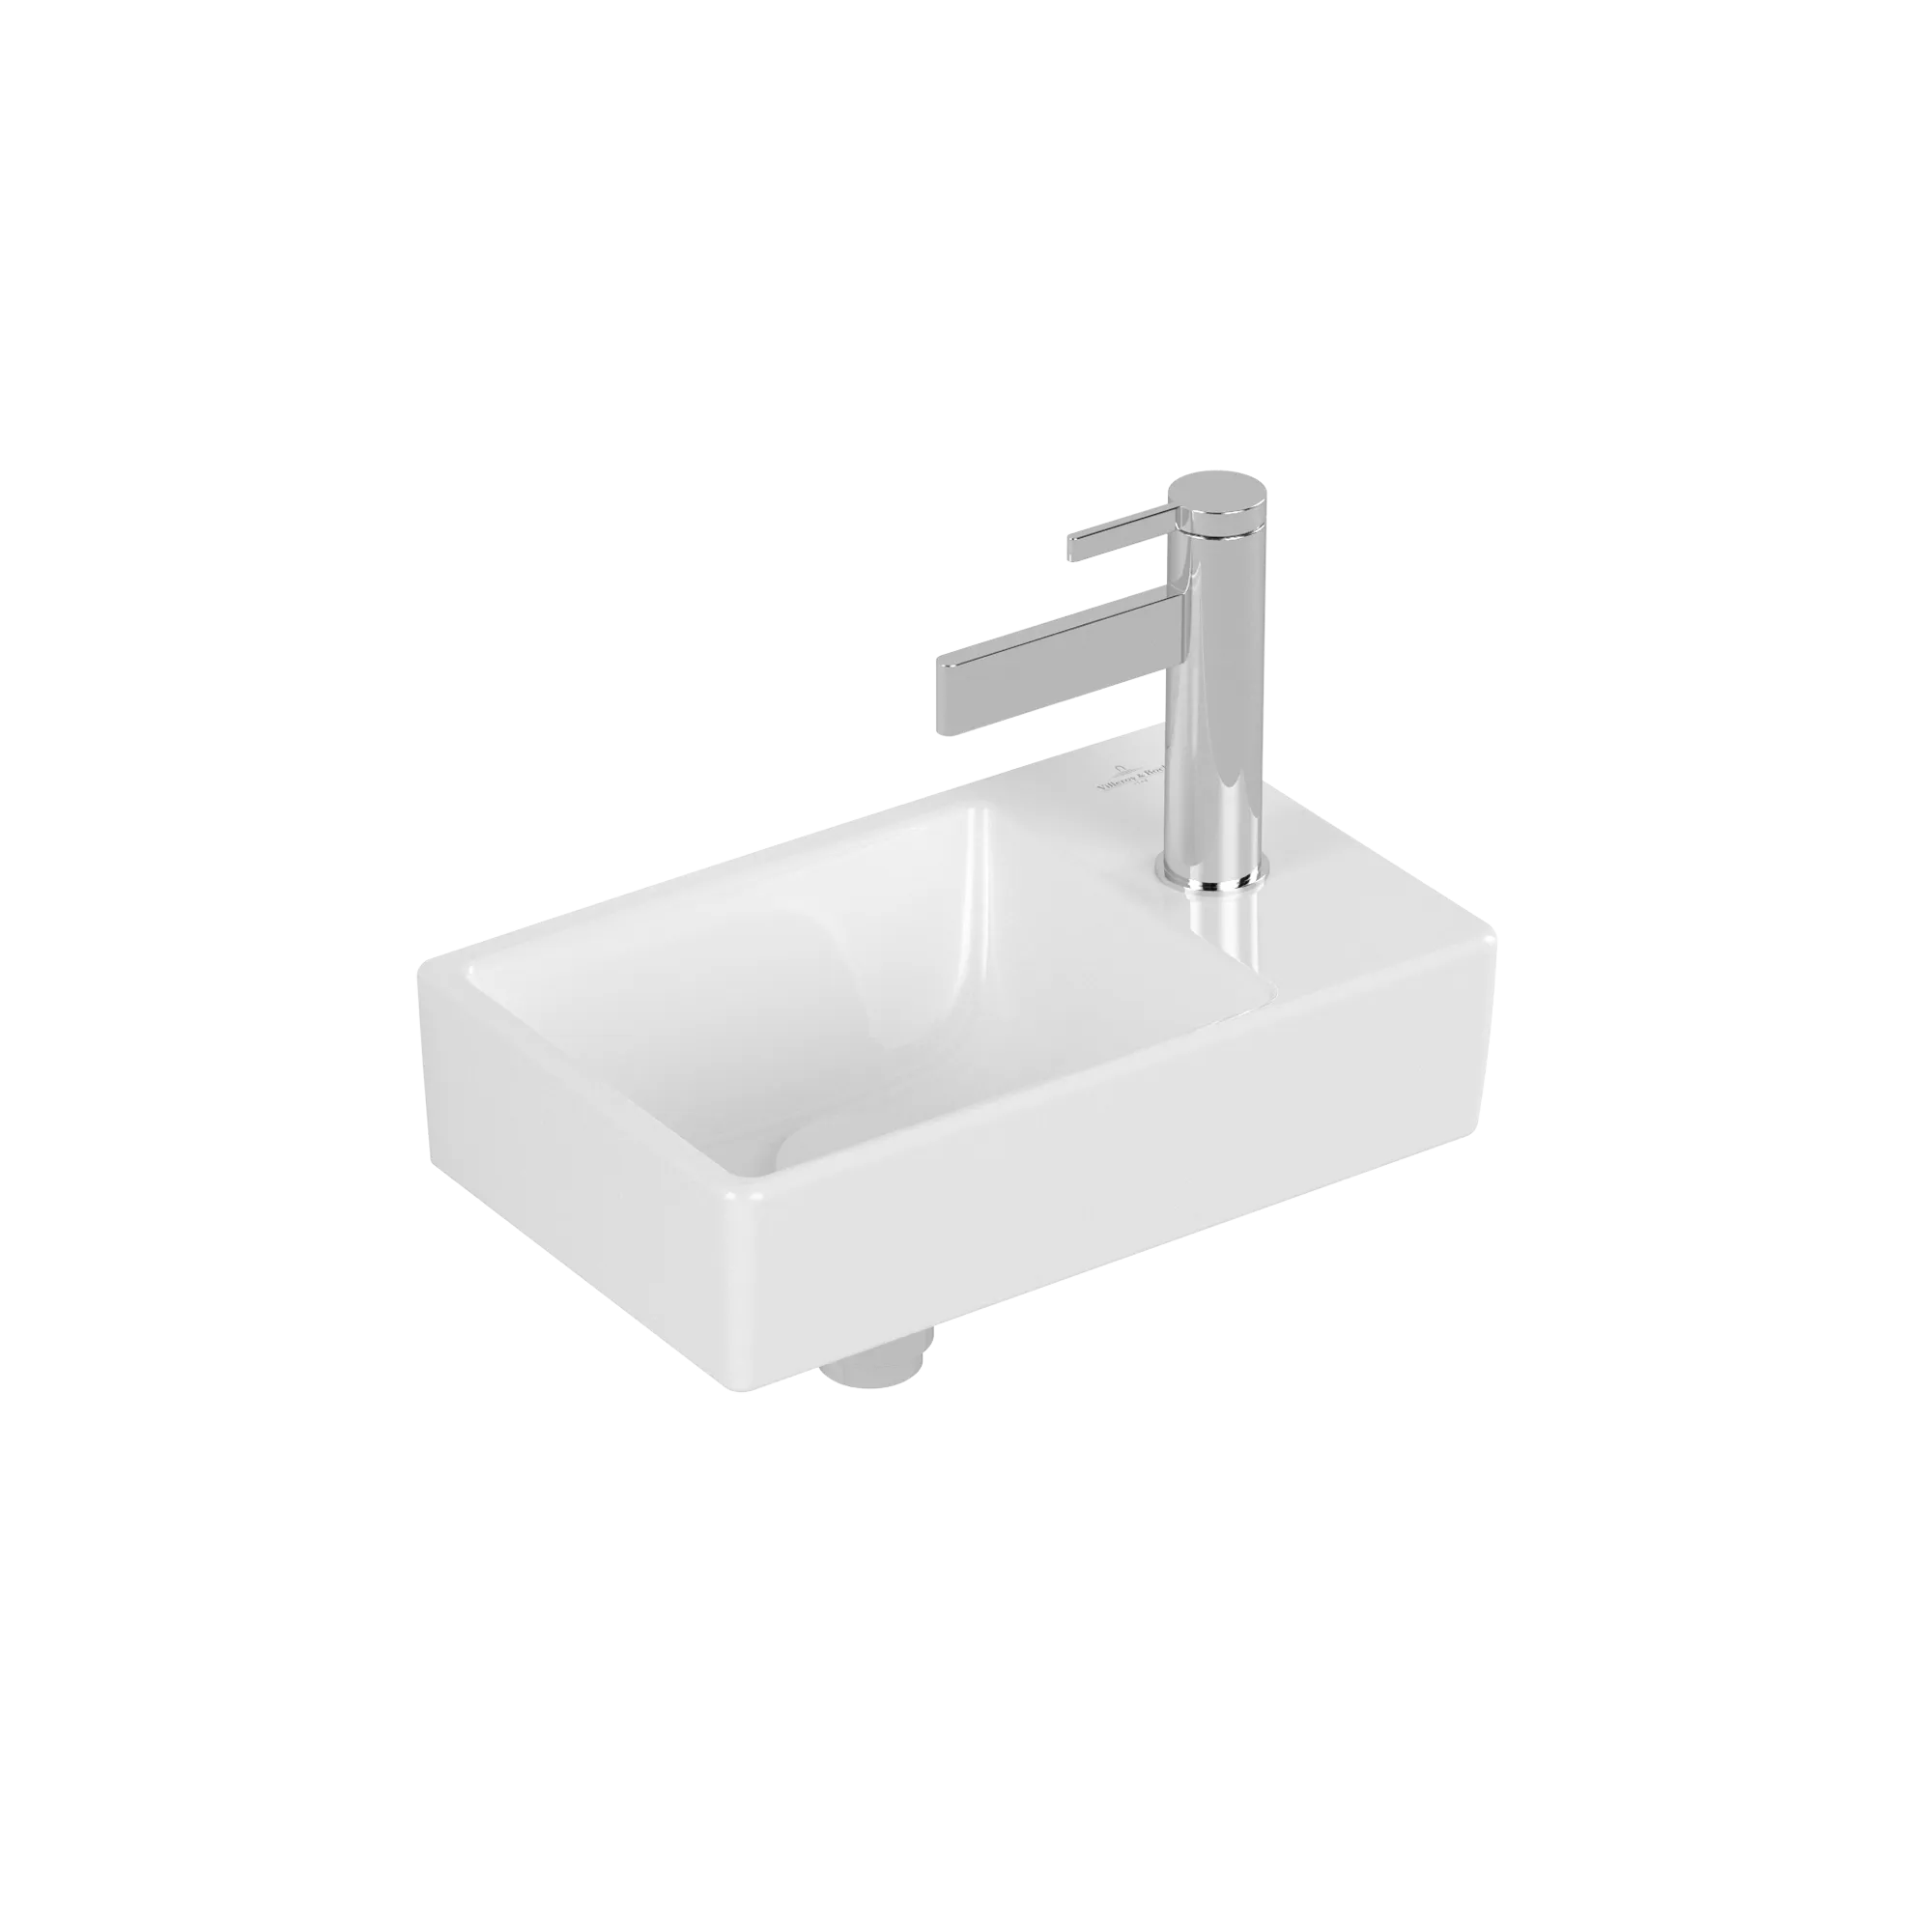 Picture of VILLEROY BOCH Avento Handwashbasin, 360 x 220 x 110 mm, White Alpin, without overflow #43003L01